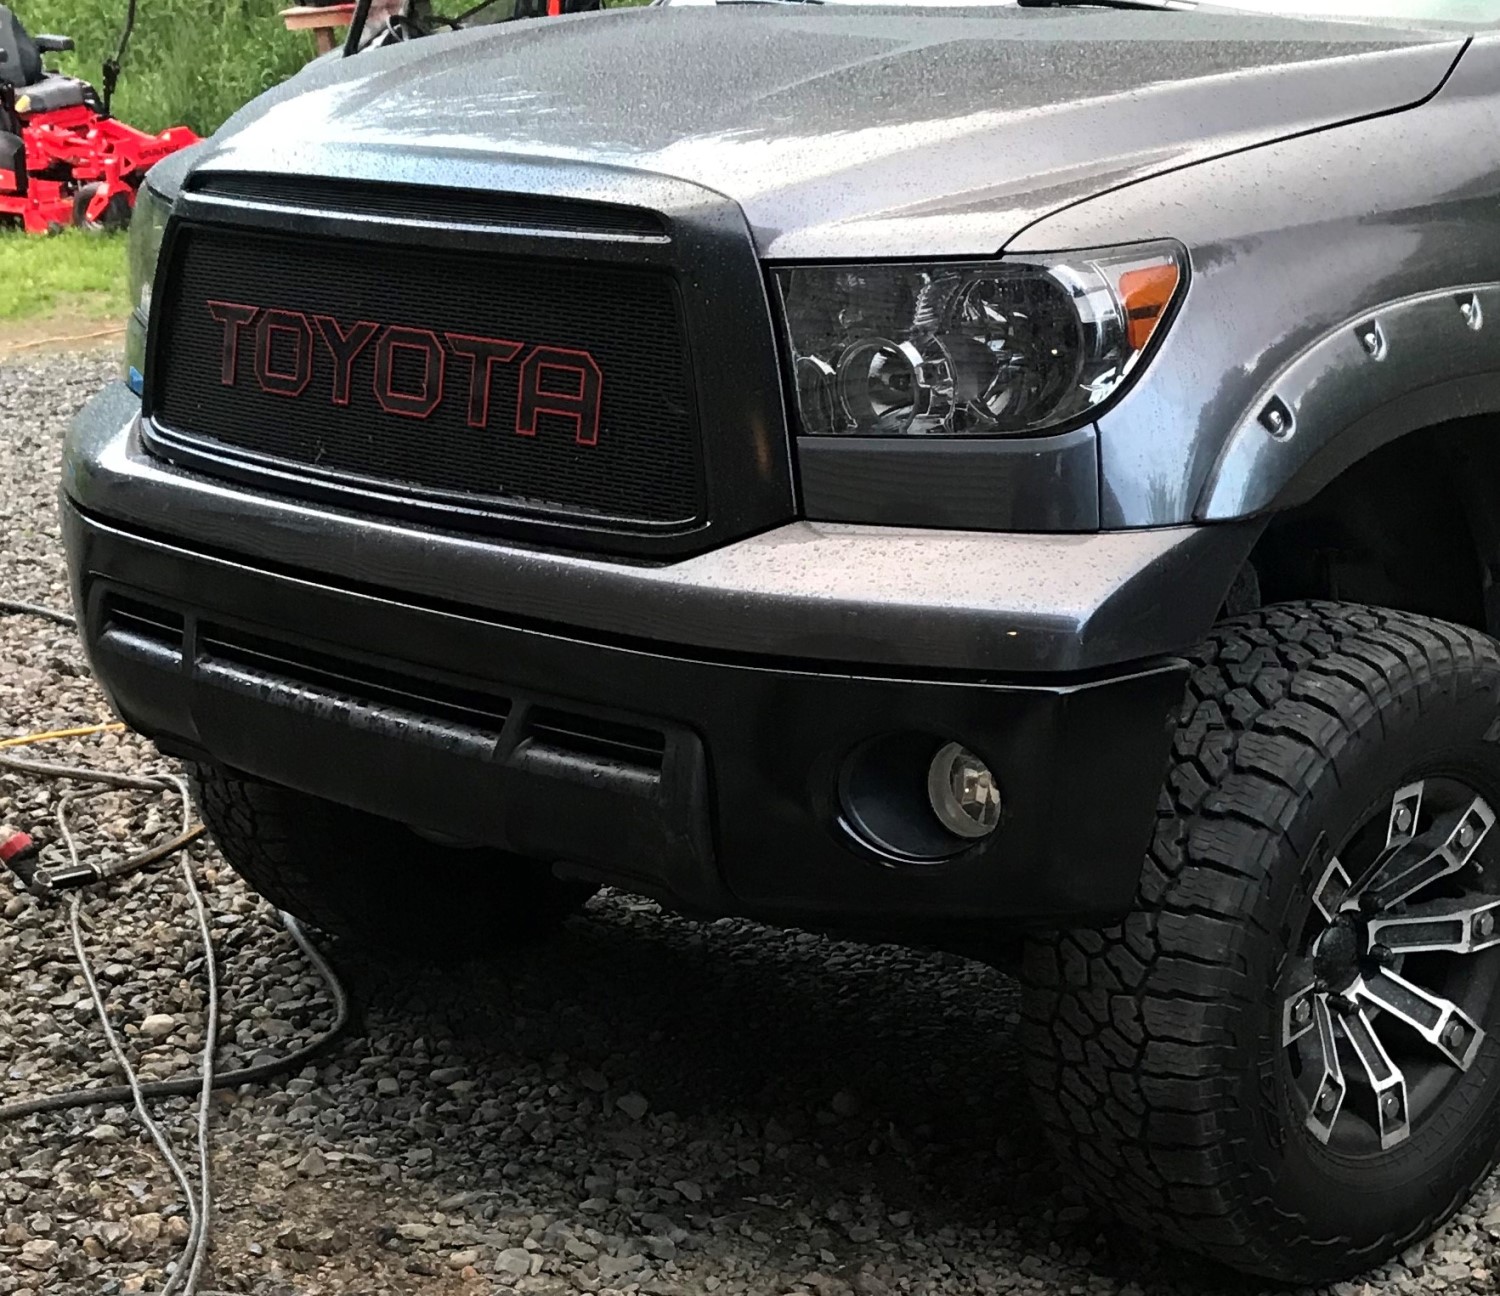 2010 - 2013 Toyota Tundra Grill Mesh with Big Letters #3